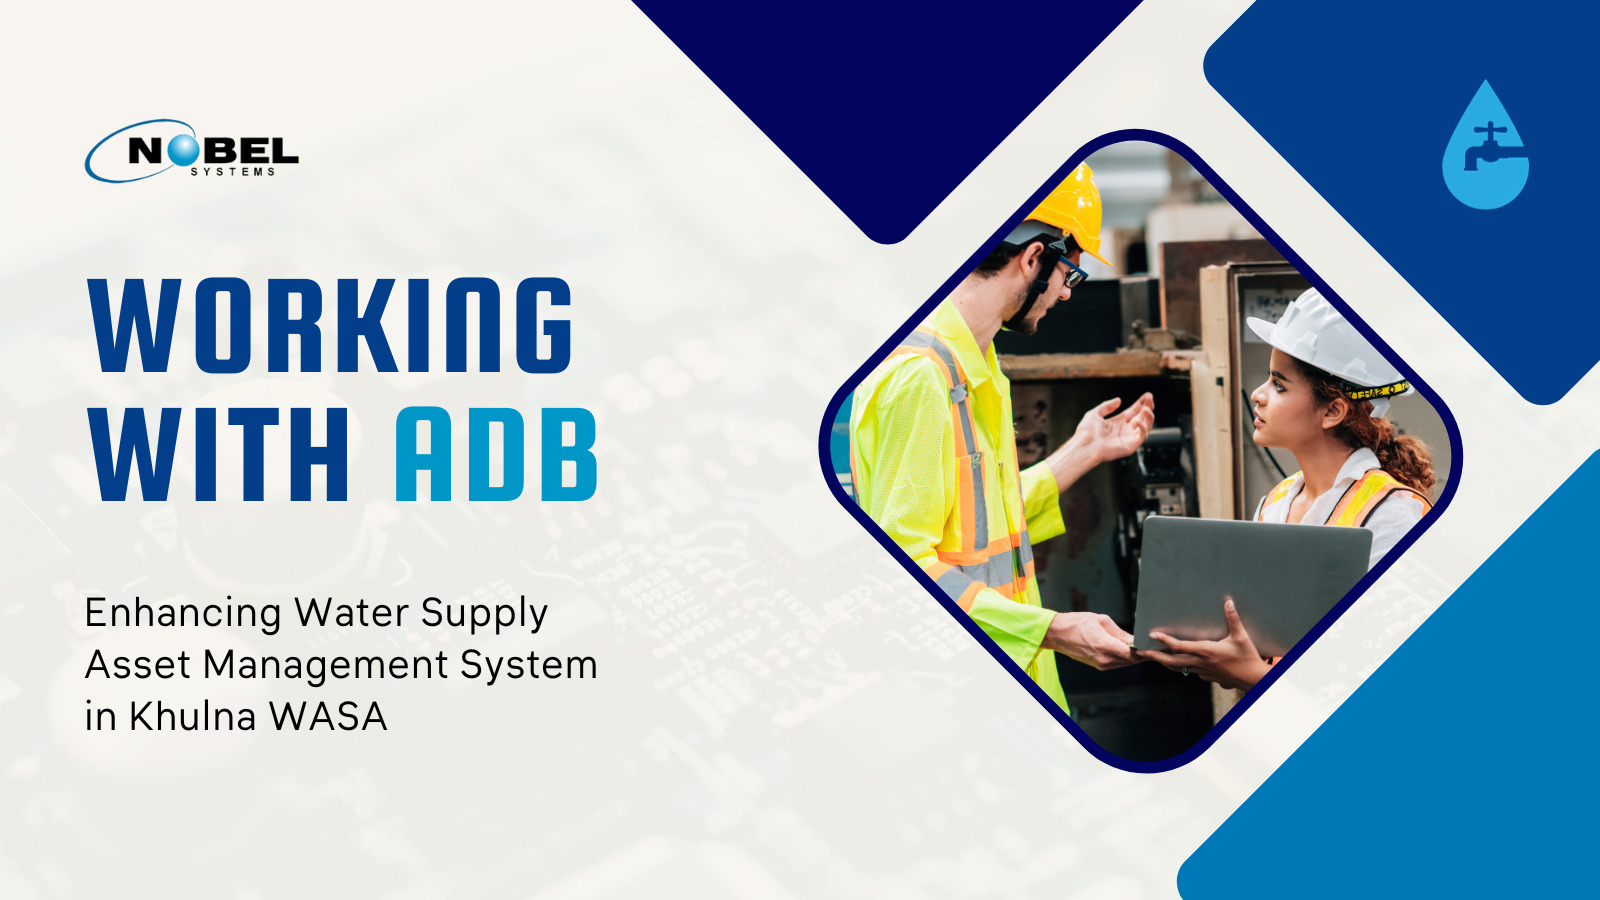 Nobel Systems is pleased to share that it has been selected for a project funded by the Asian Development Bank (ADB). This project aims to enhance the asset management practices in the water sector by enabling Khulna WASA (KWASA) in Bangladesh to adopt a GIS-based water supply Asset Management System (AMS) solution.